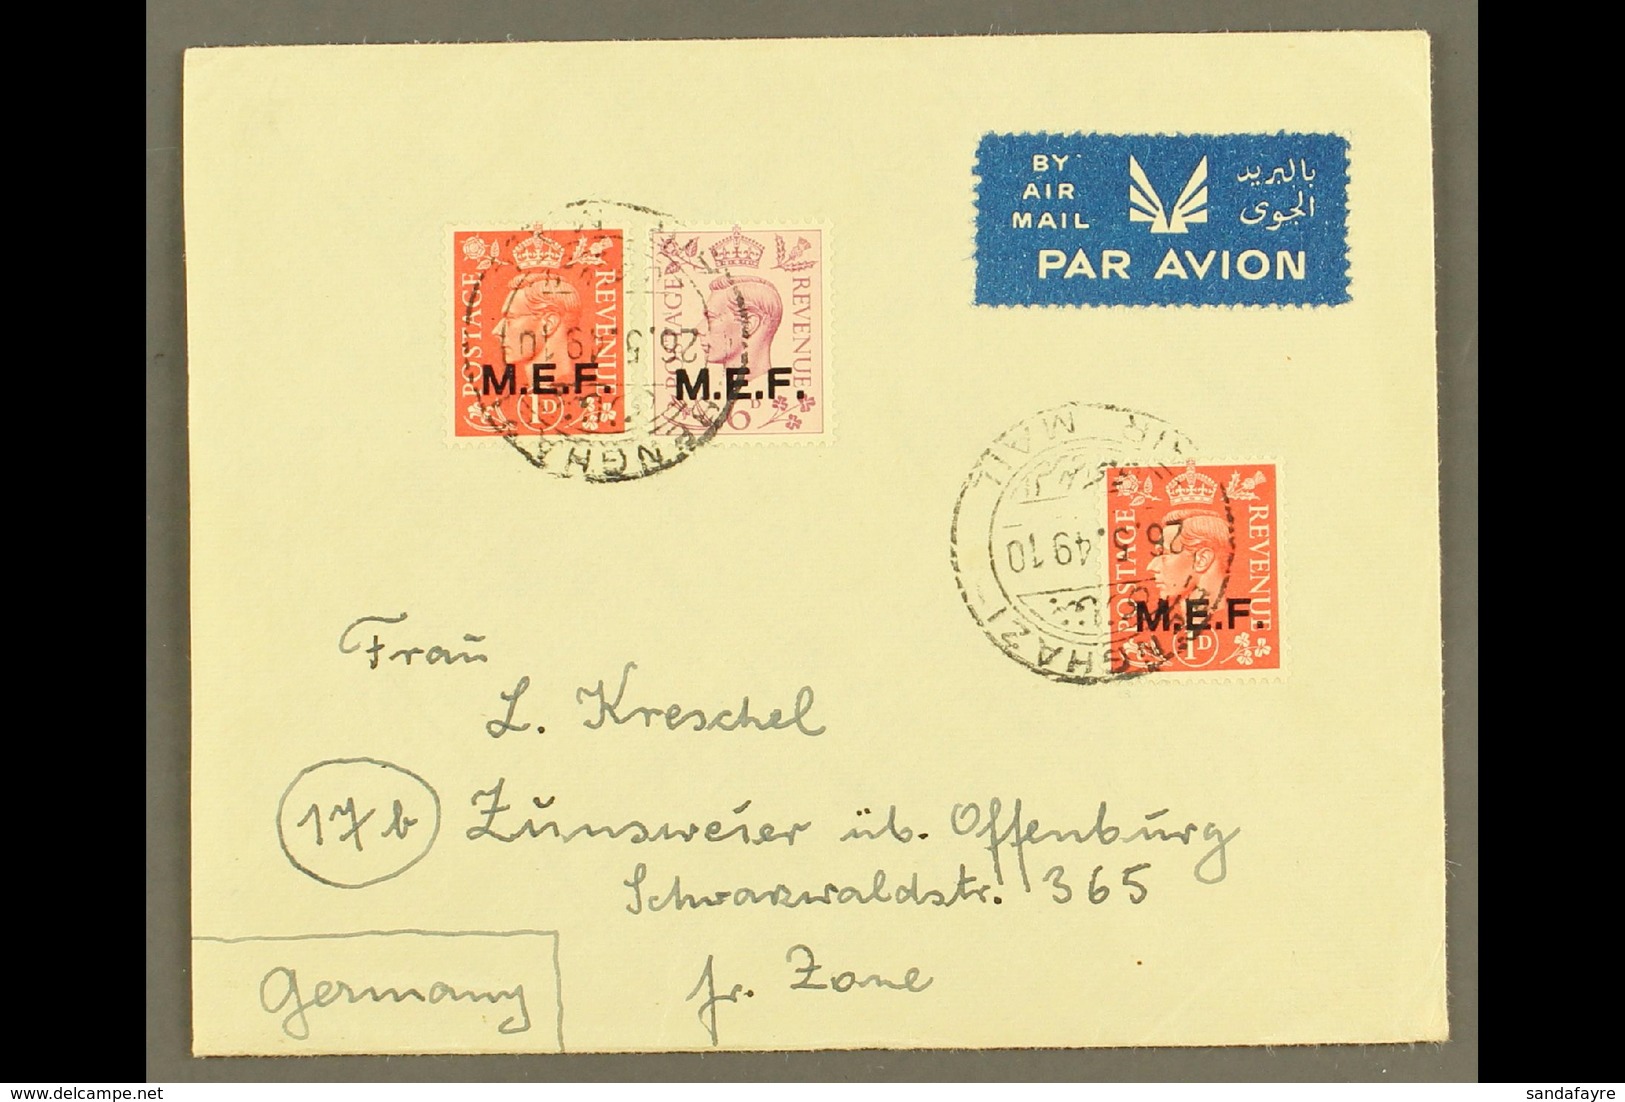 CYRENAICA 1949 Airmailed Cover To French Zone, Germany, Franked KGVI 1d X2 & 6d "M.E.F." Ovpts, SG M11, M16, Benghazi 26 - Italienisch Ost-Afrika